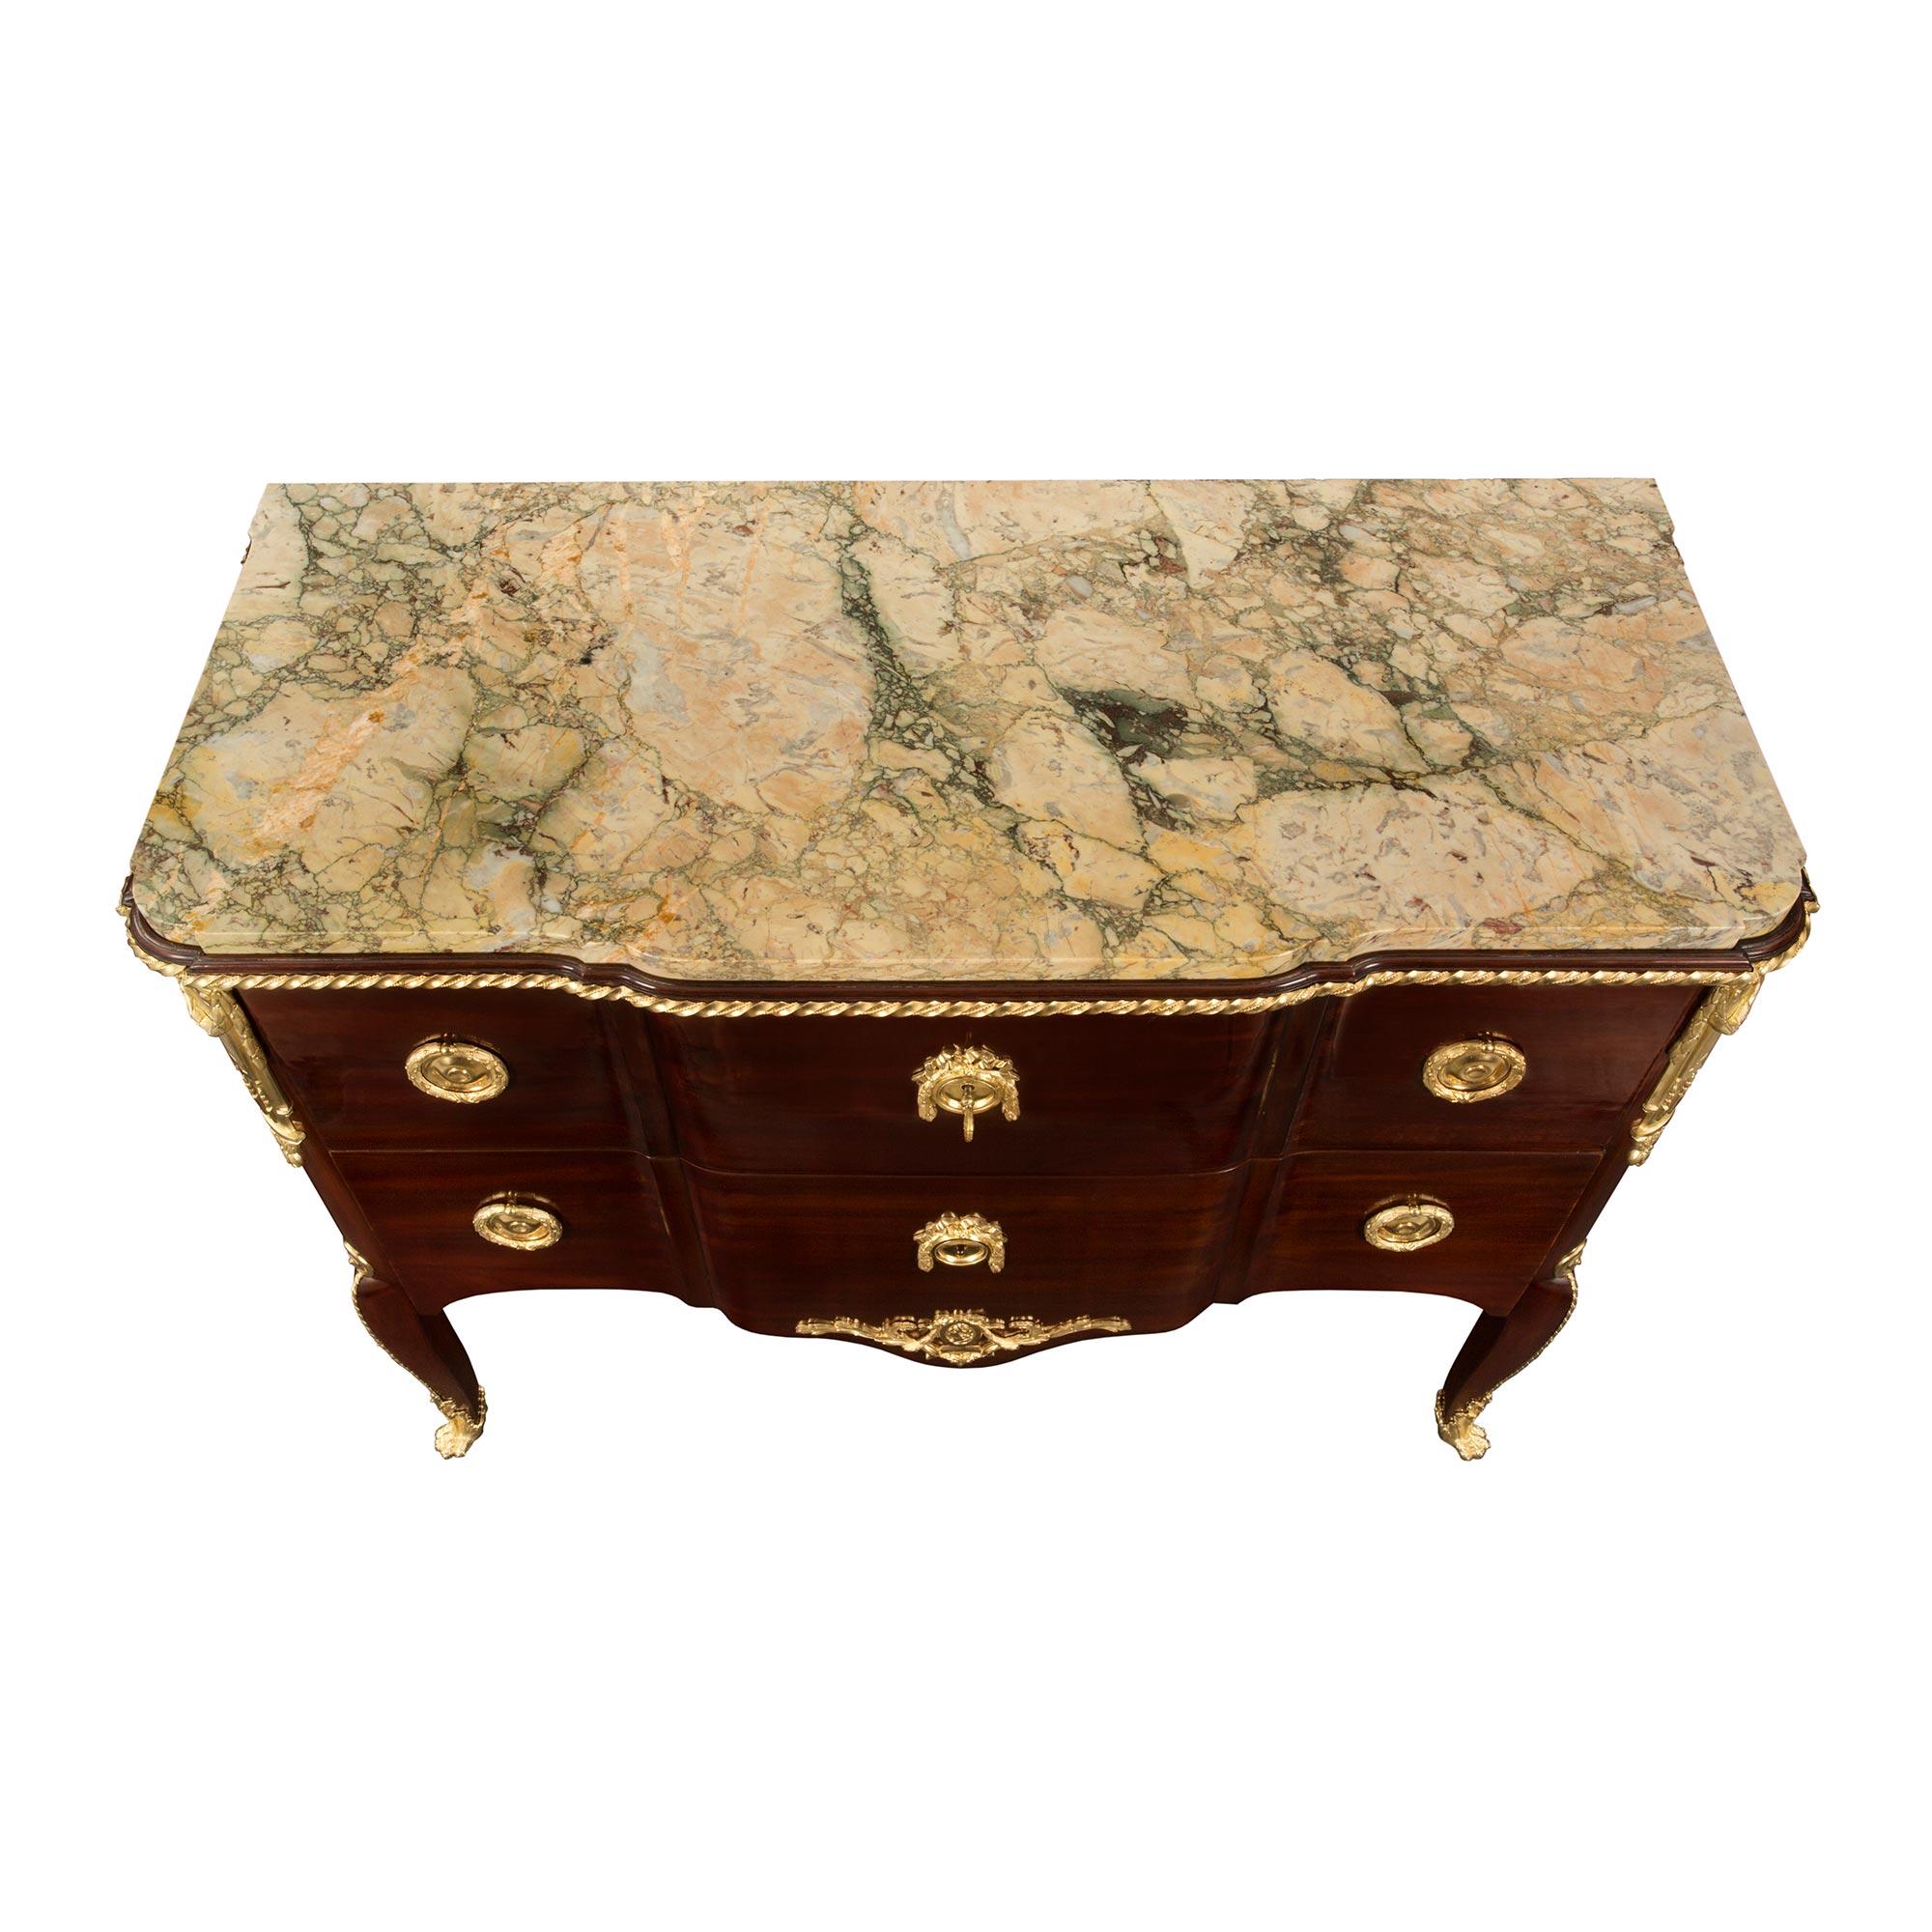 An extremely elegant and high quality French 19th century Transitional style mahogany, marble and ormolu two-drawer chest. The chest is raised by handsome cabriole legs with striking wraparound lion paw designed ormolu sabots with an acanthus leaf.